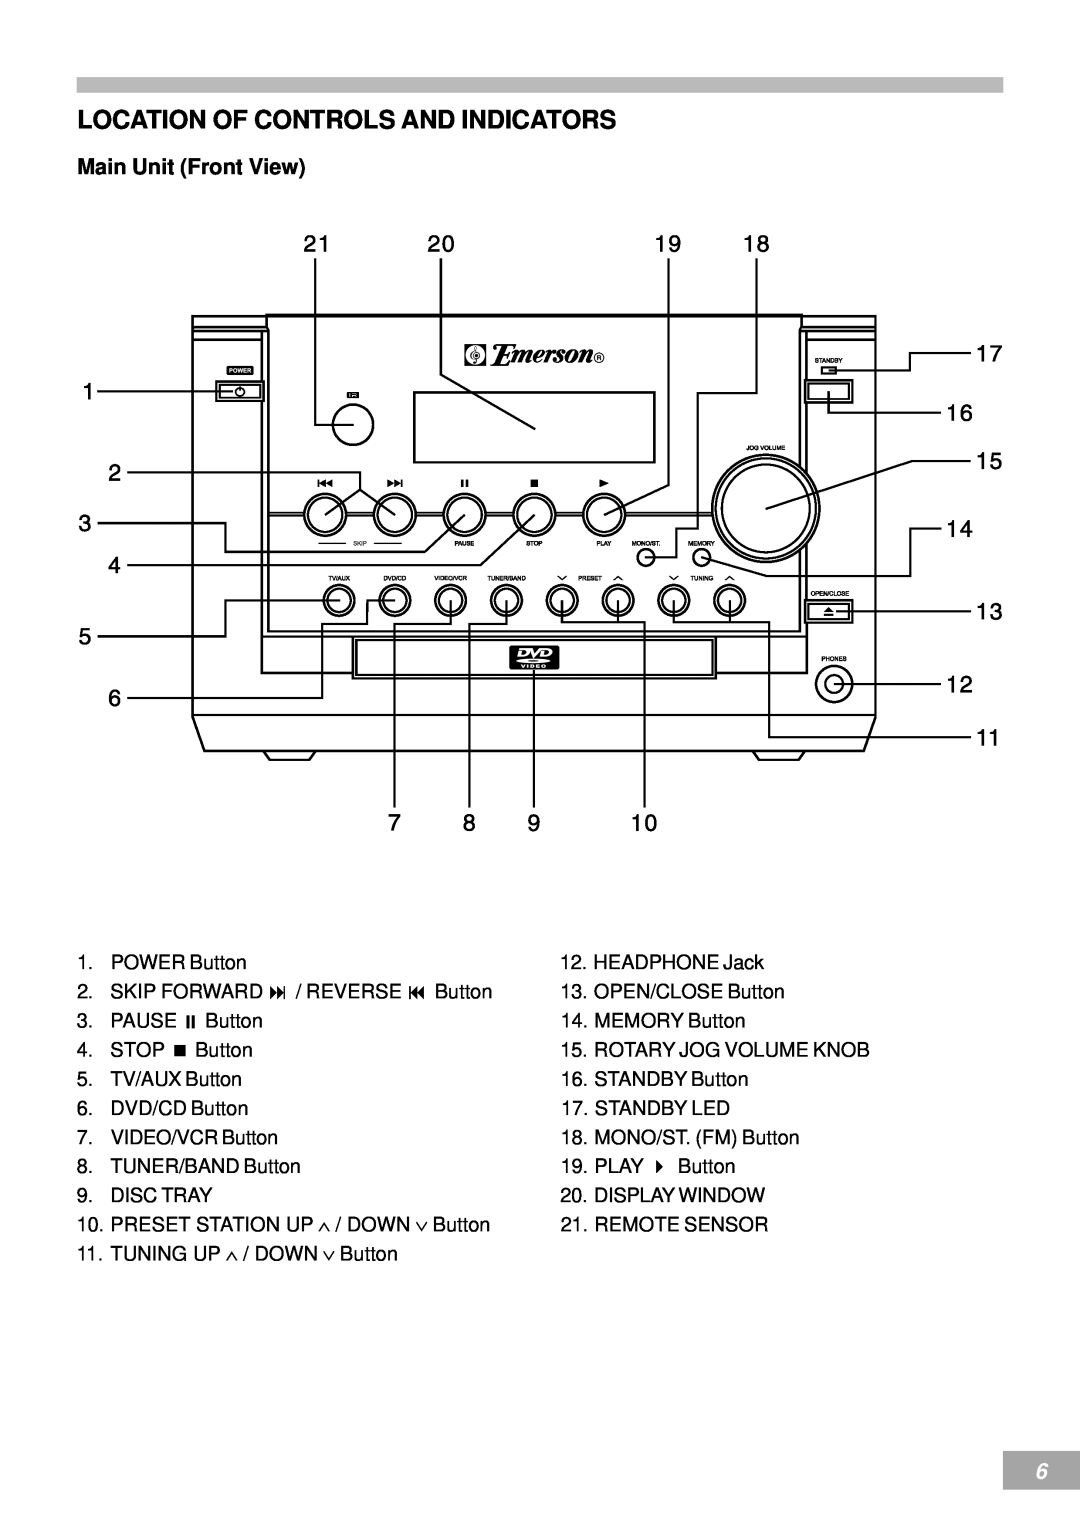 Emerson AV50 owner manual Location Of Controls And Indicators, Main Unit Front View 